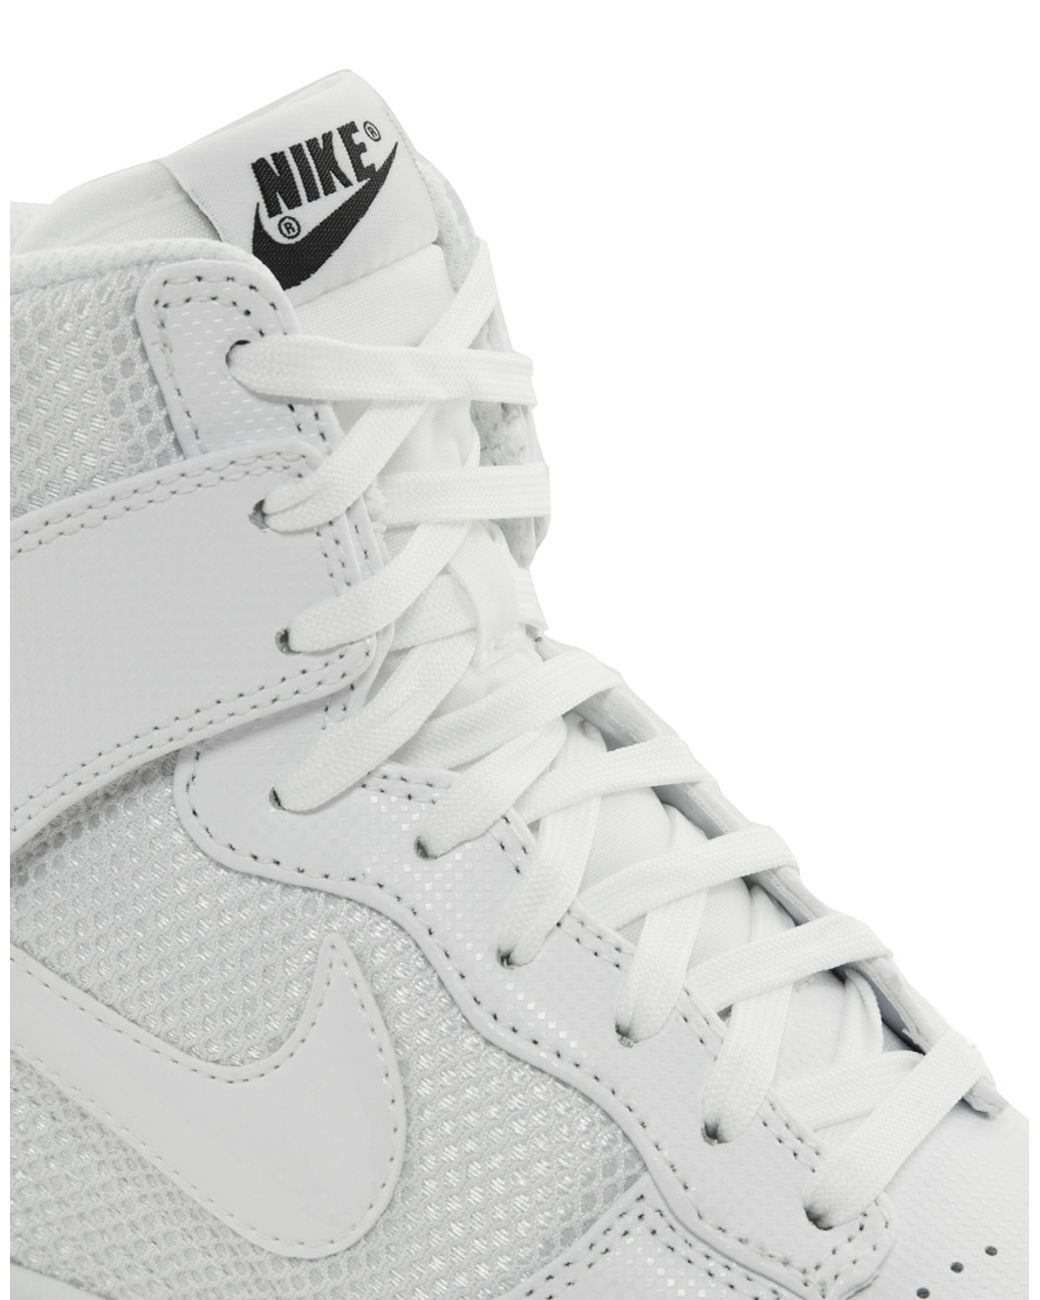 Competencia Ver insectos discreción Nike Dunk Sky High Mesh White Wedge Trainers | Lyst